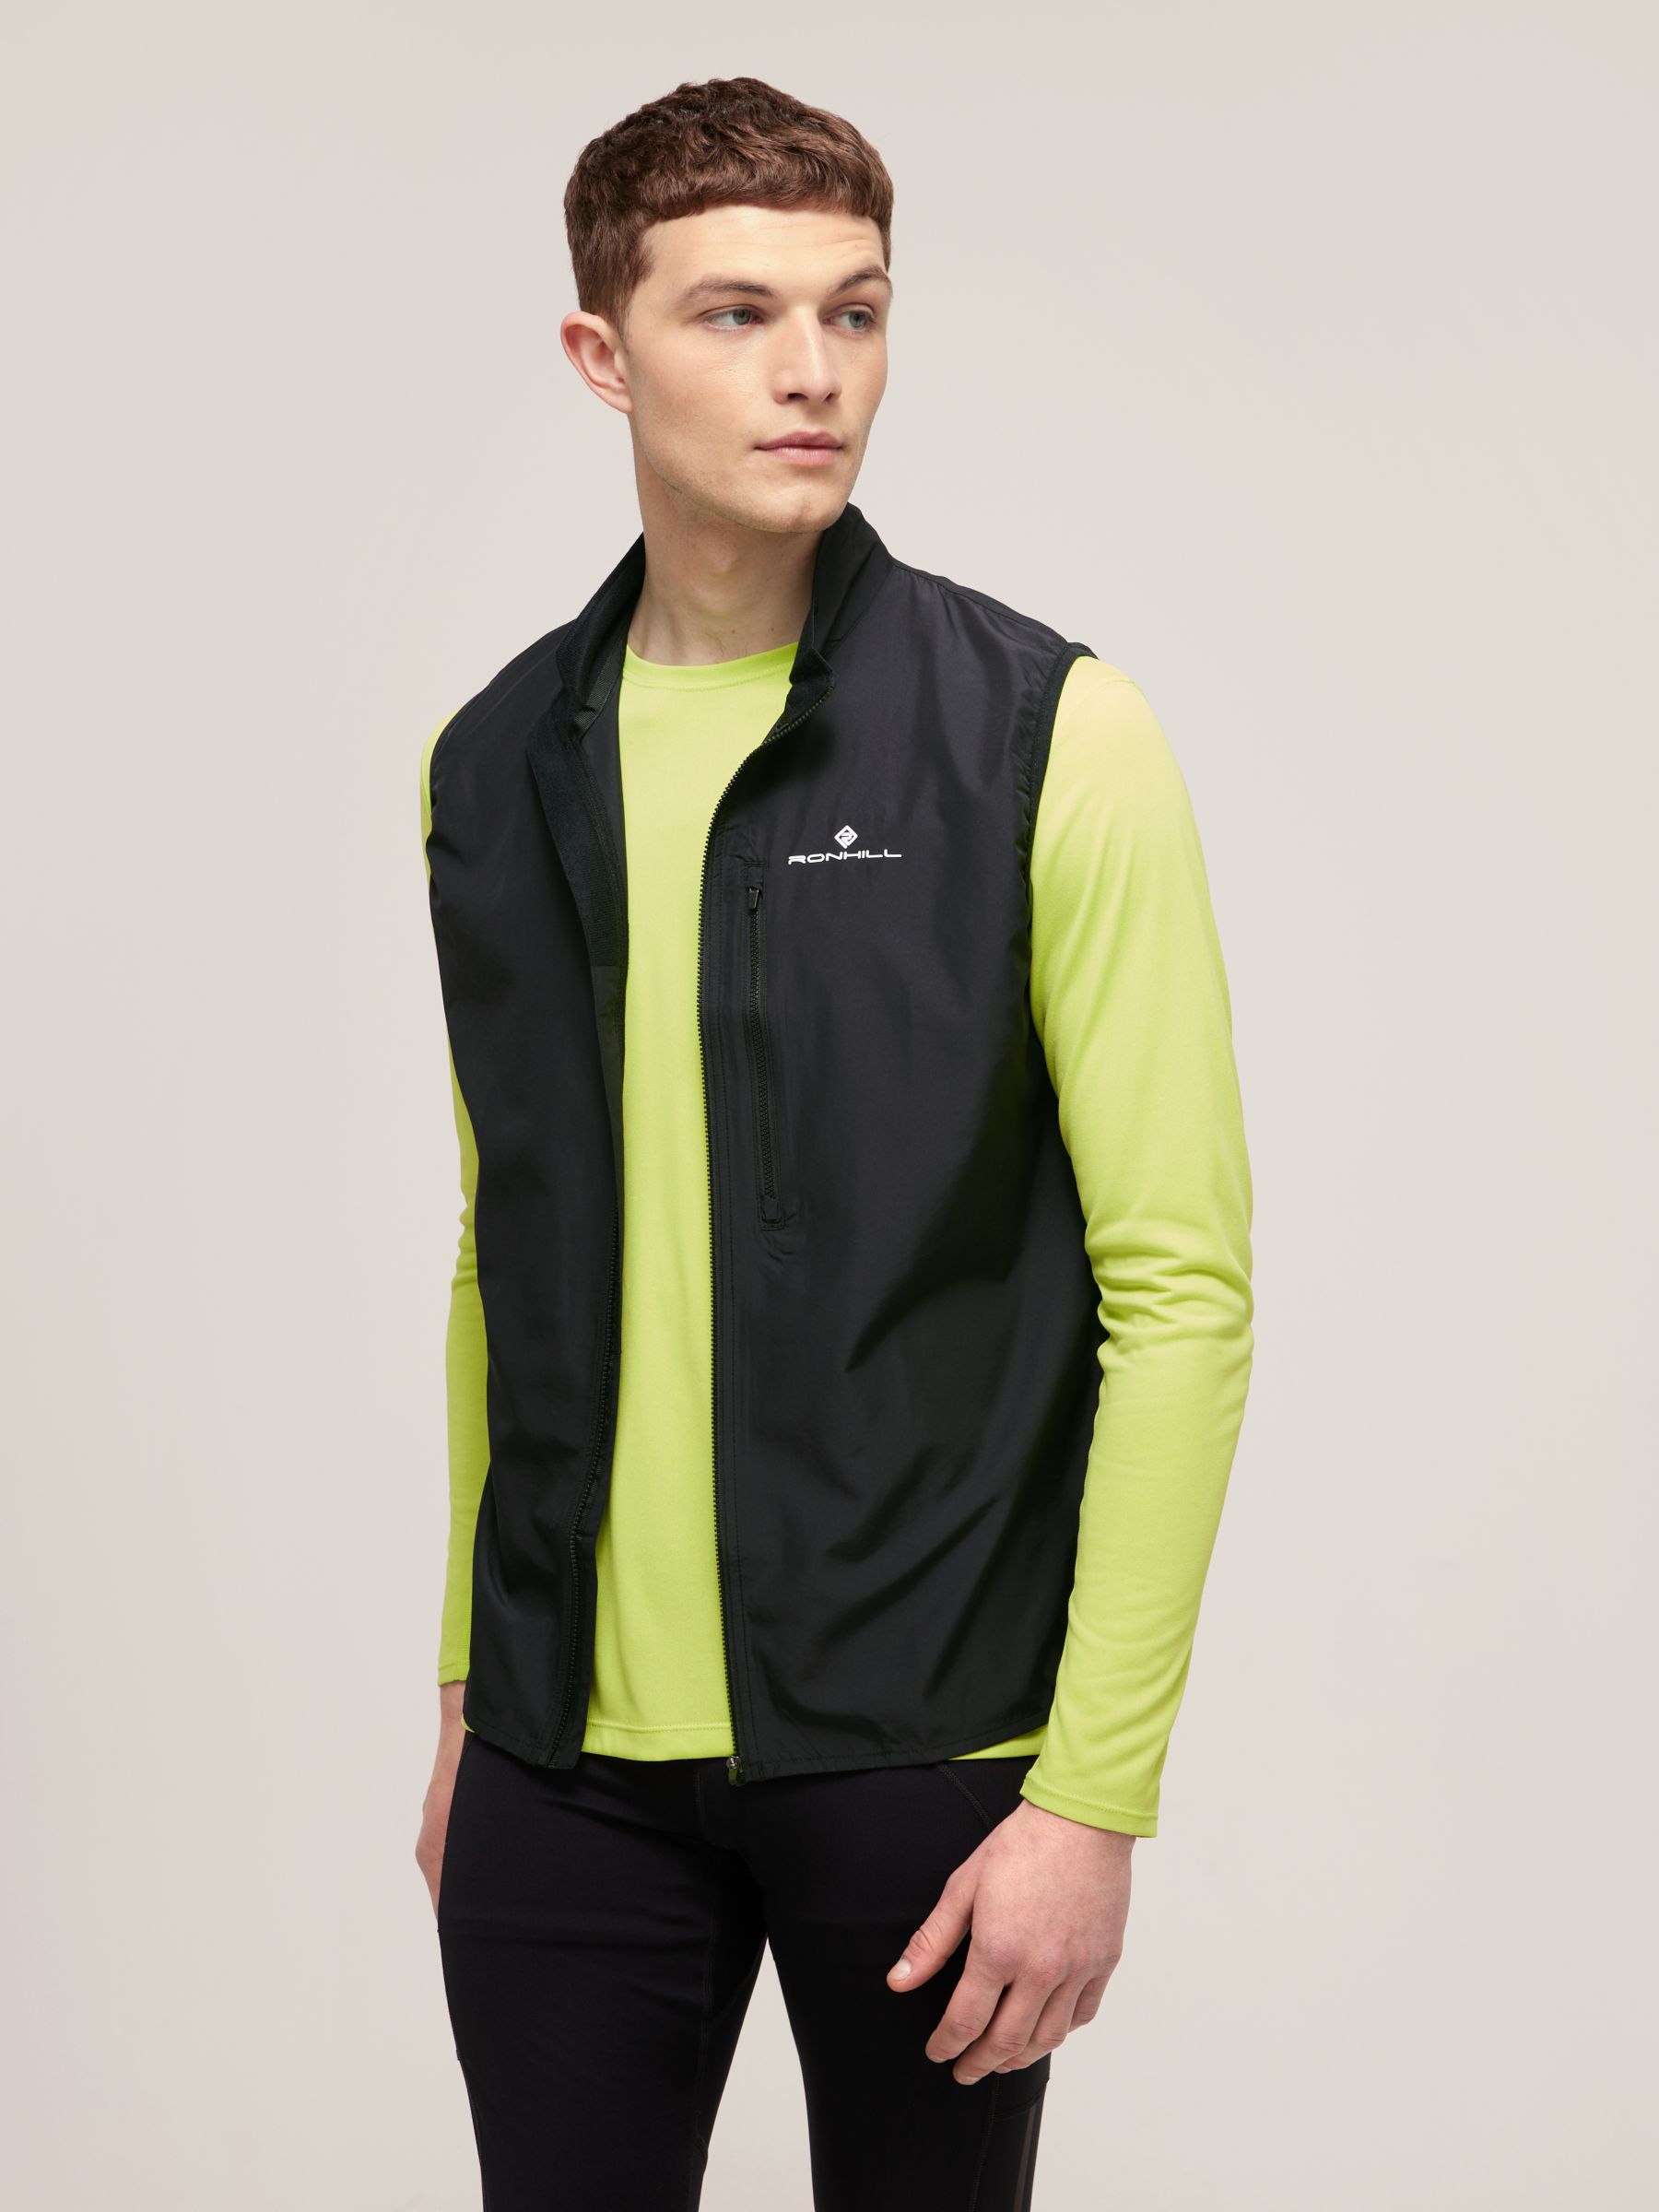 Ronhill Core Women's Water Resistant Running Gilet at John Lewis & Partners